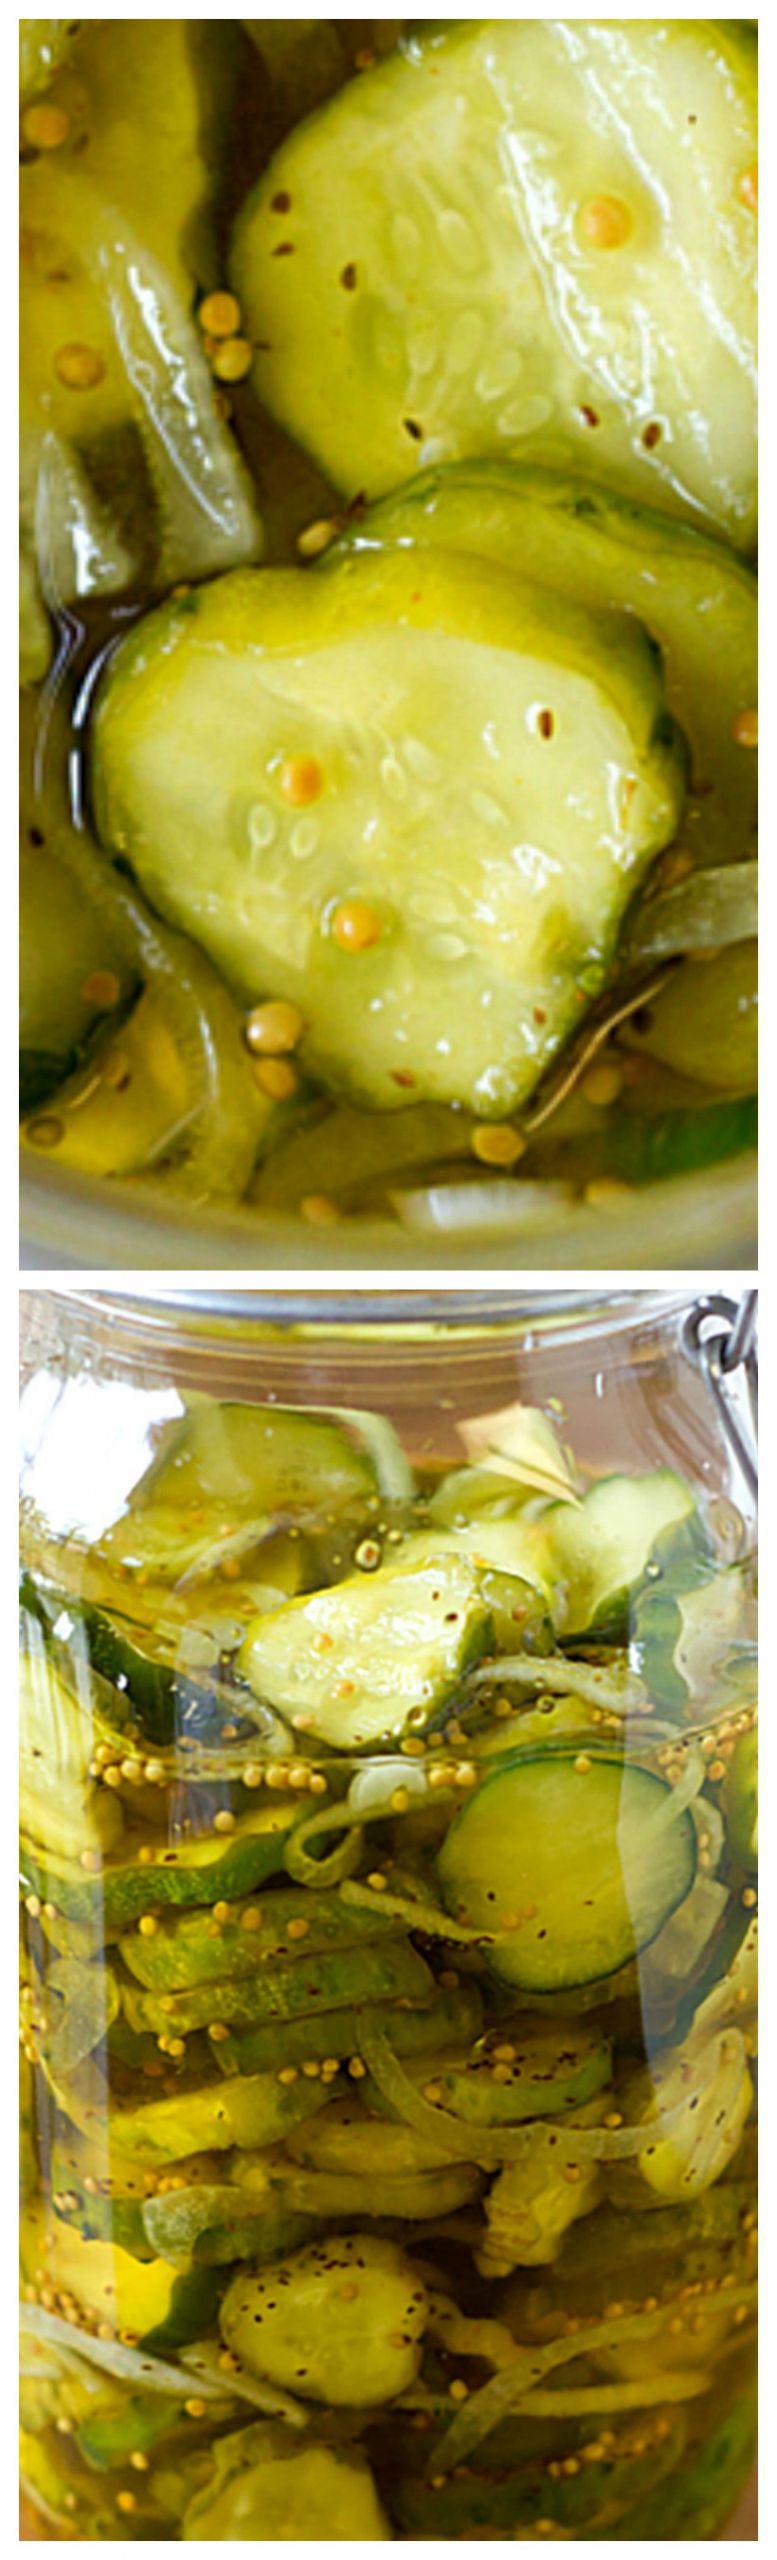 Bread And Butter Pickles Recipe No Canning
 Refrigerator Bread and Butter Pickles Recipe